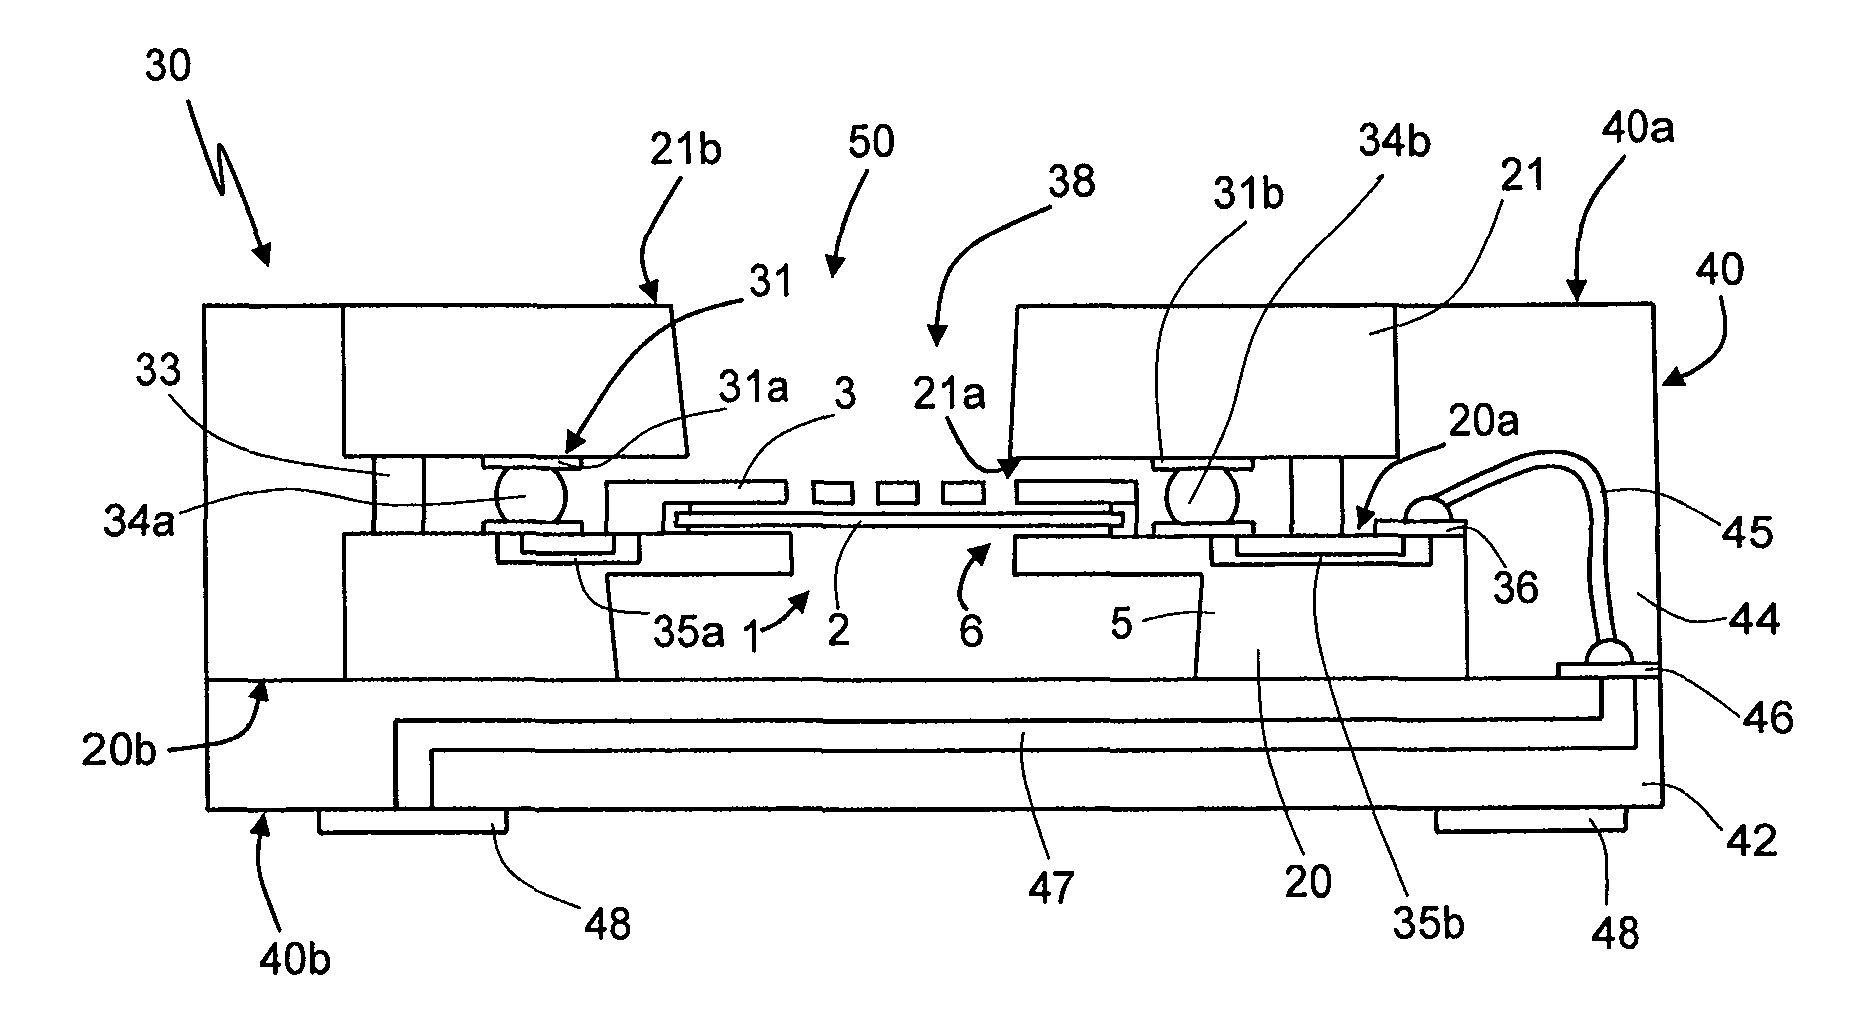 Assembly of a capacitive acoustic transducer of the microelectromechanical type and package thereof